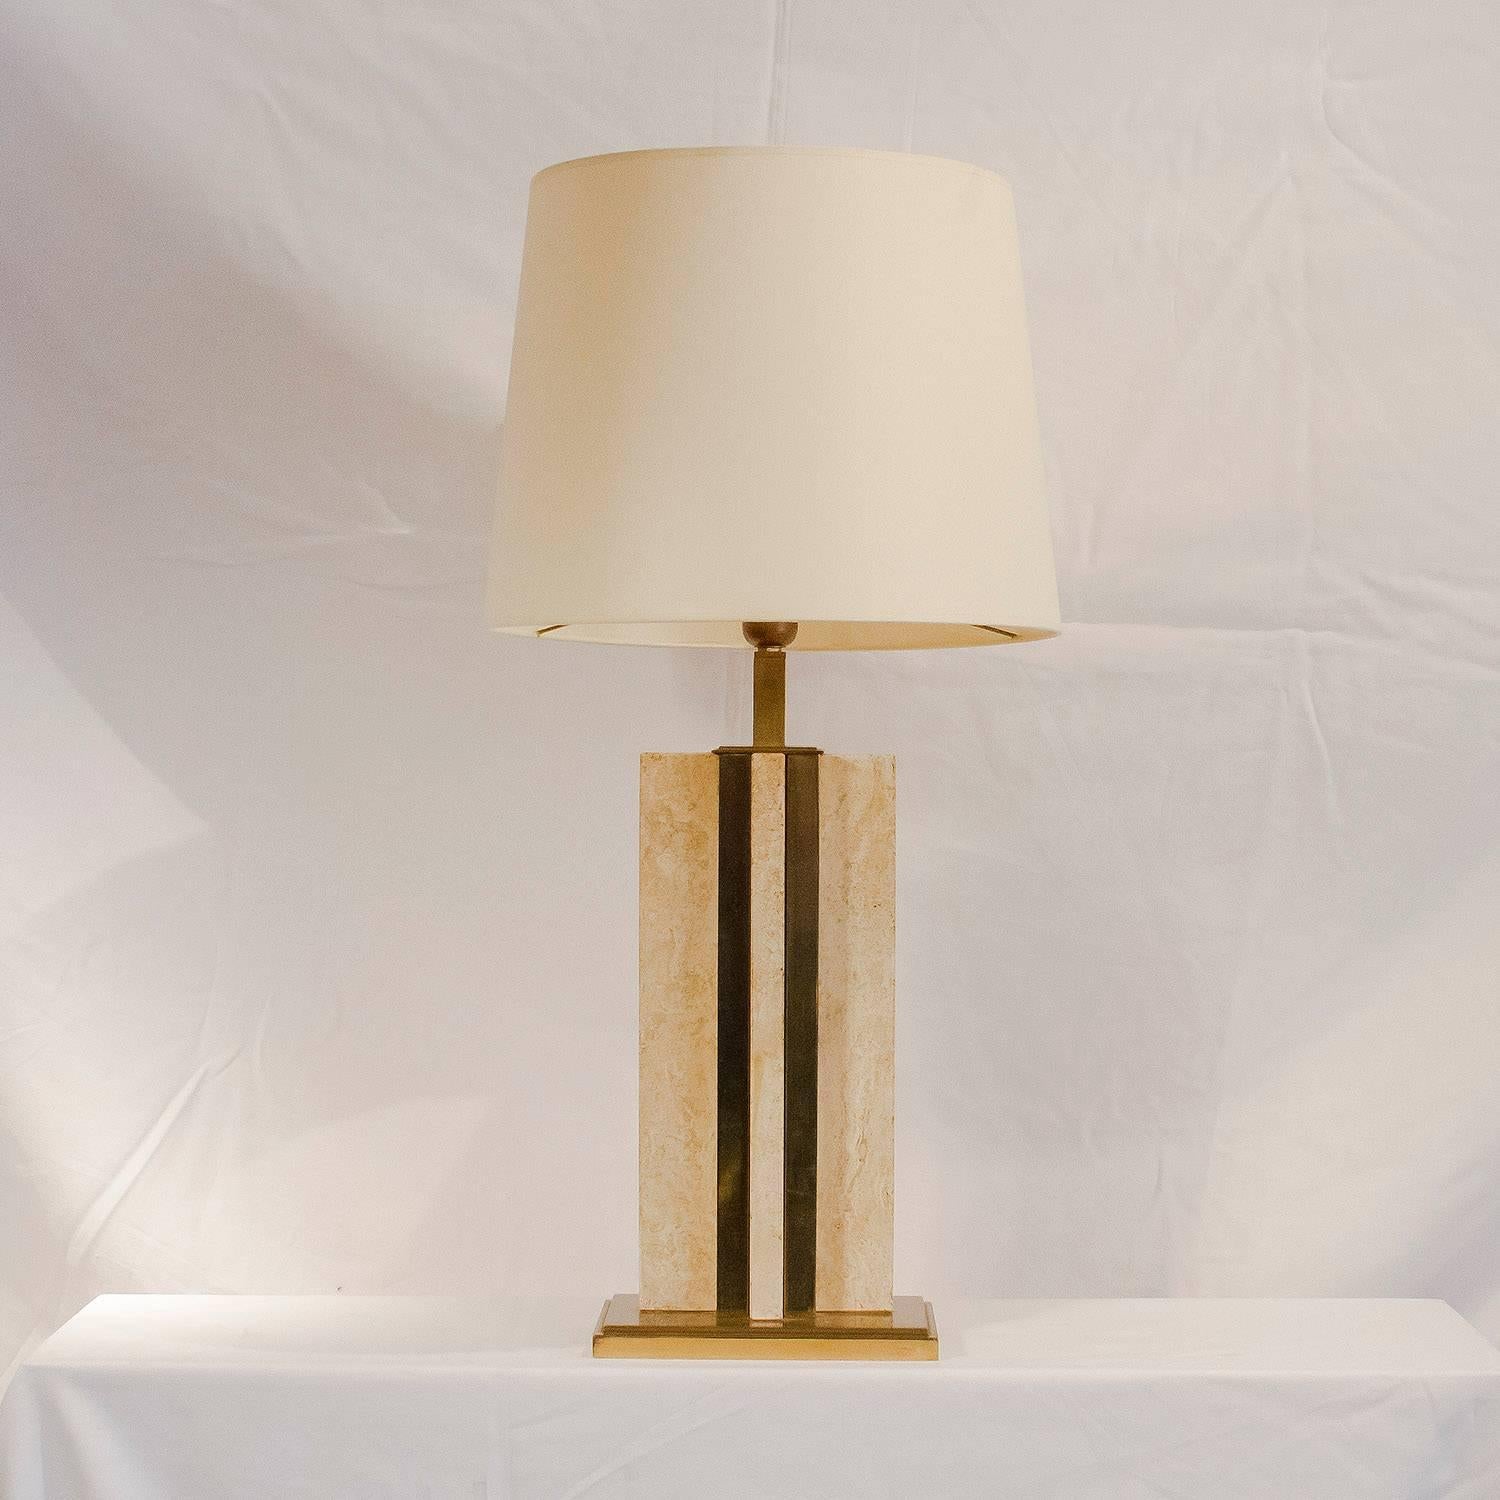 French travertine and brass table lamp, 1970s.

Please contact us for delivery details.